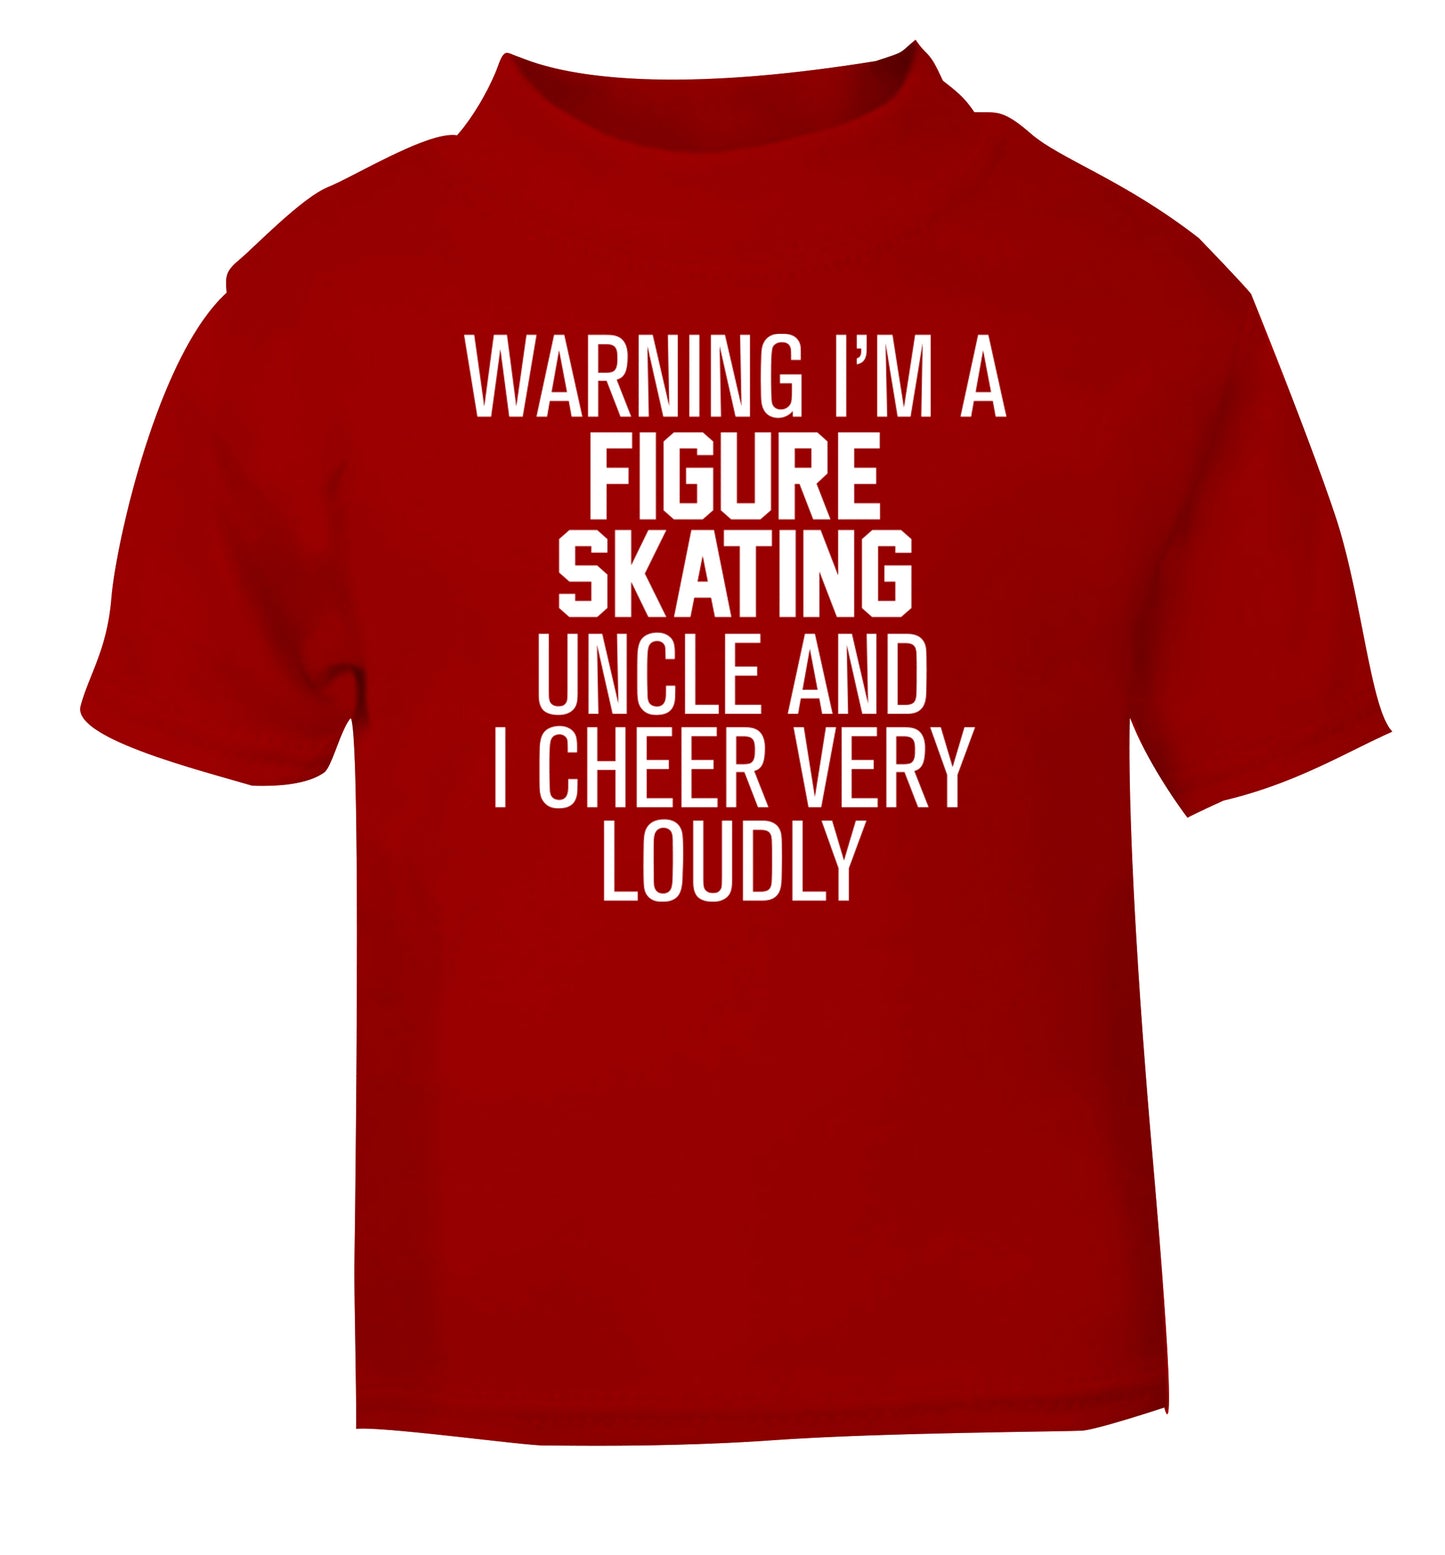 Warning I'm a figure skating uncle and I cheer very loudly red Baby Toddler Tshirt 2 Years